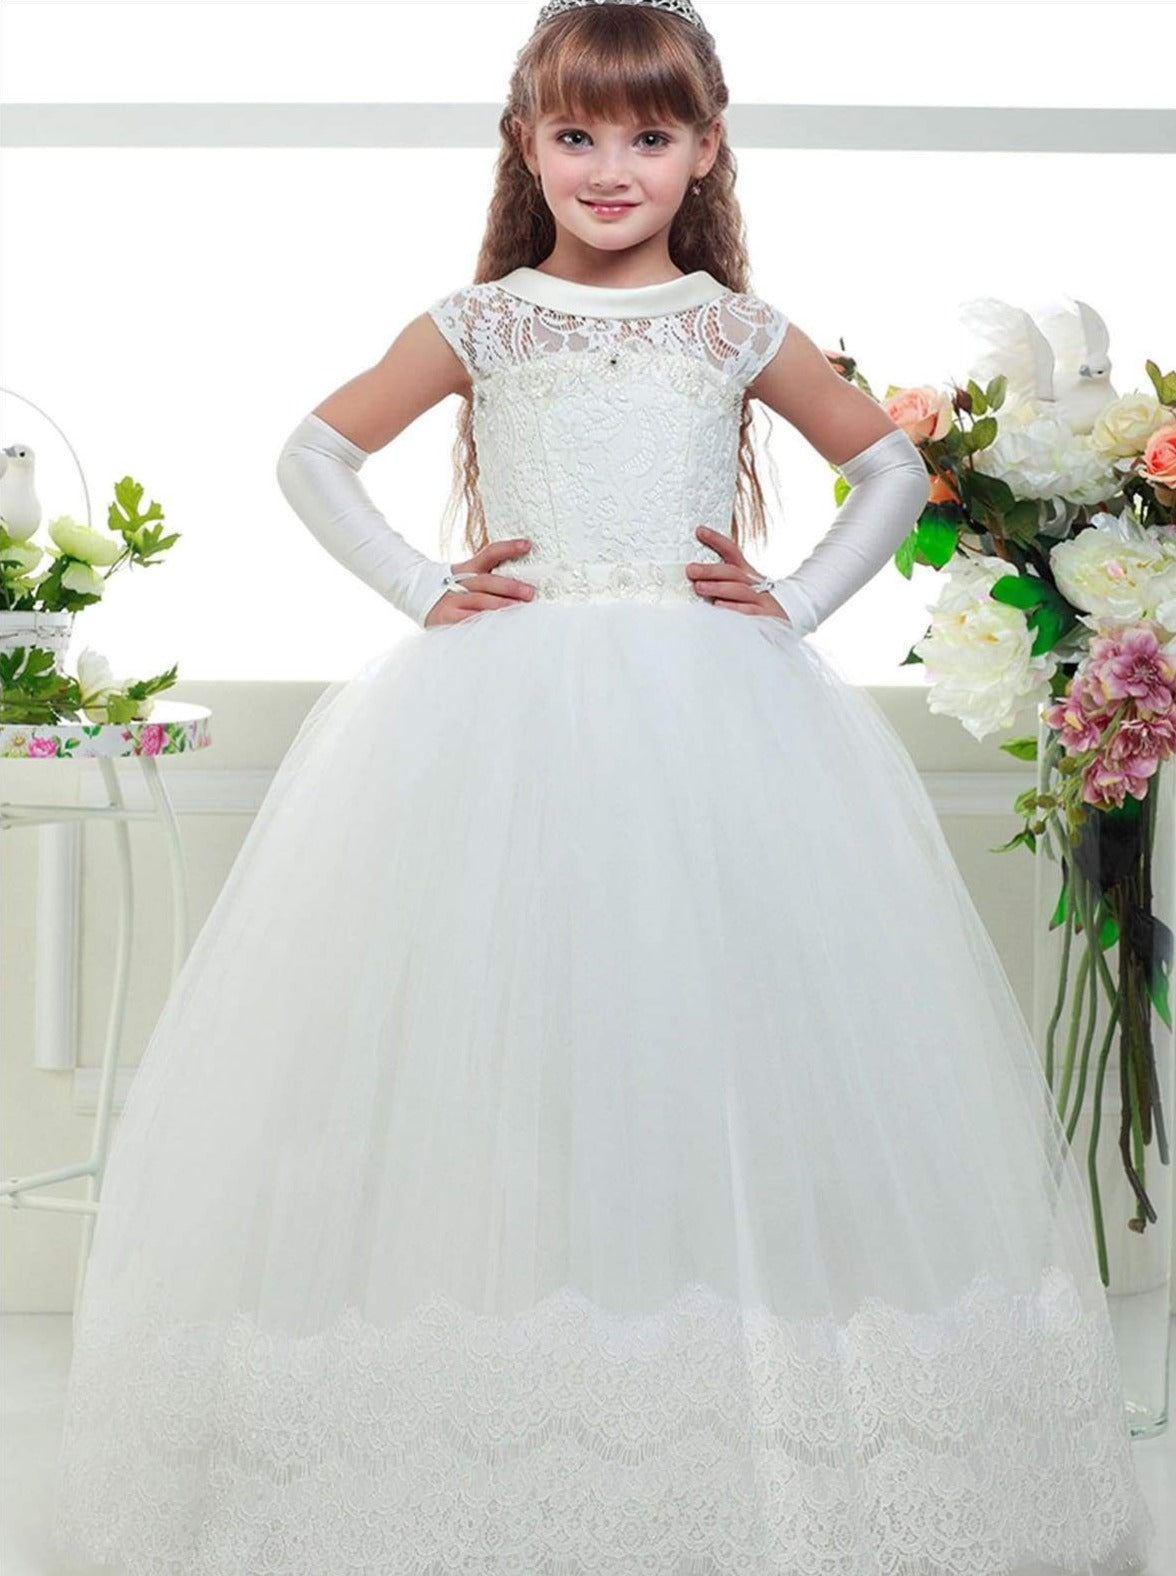 Girls White Lace-up Back Communion Gown - 2T / White - Girls Gowns